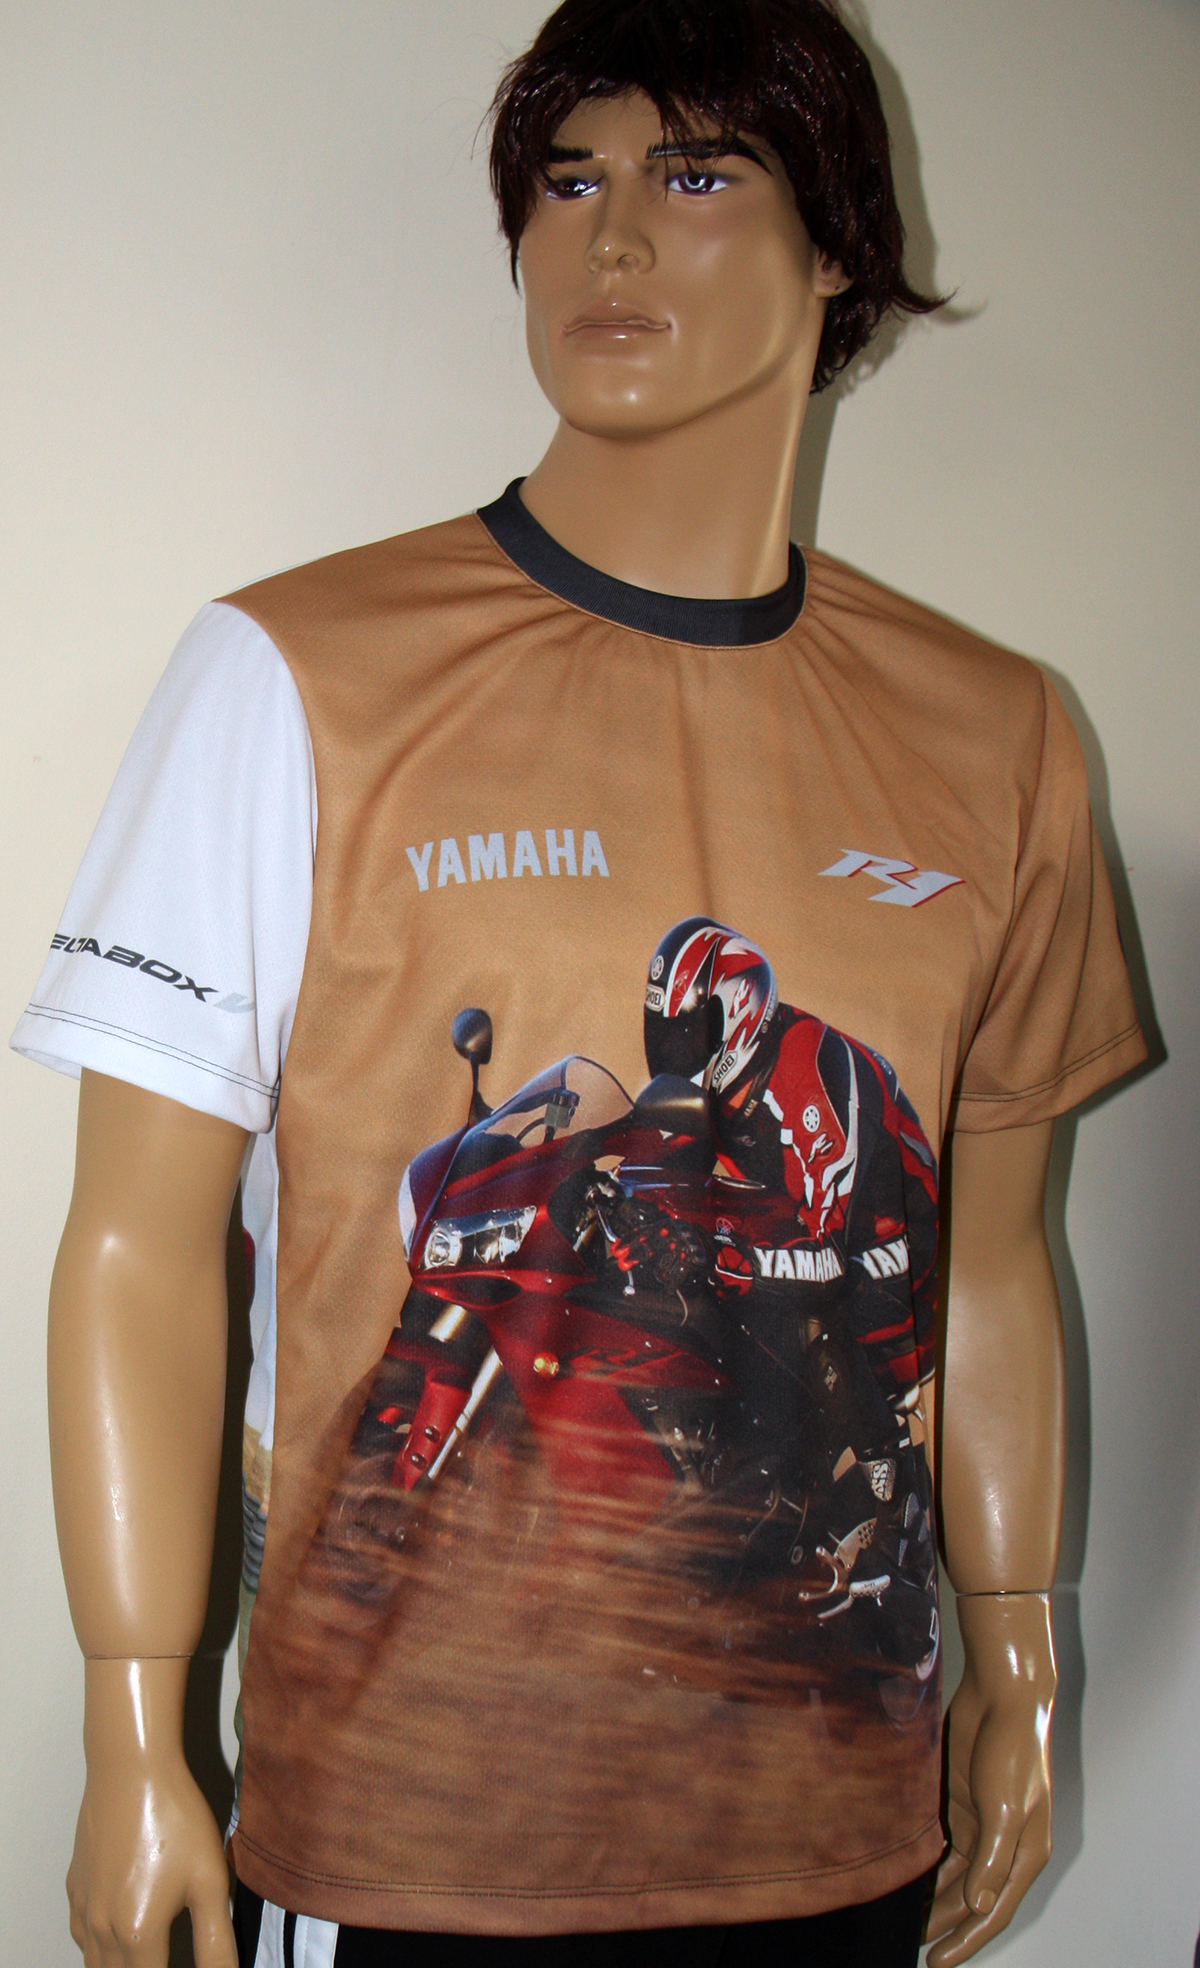 Yamaha Yzf R1 T Shirt With Logo And All Over Printed Picture T Shirts With All Kind Of Auto